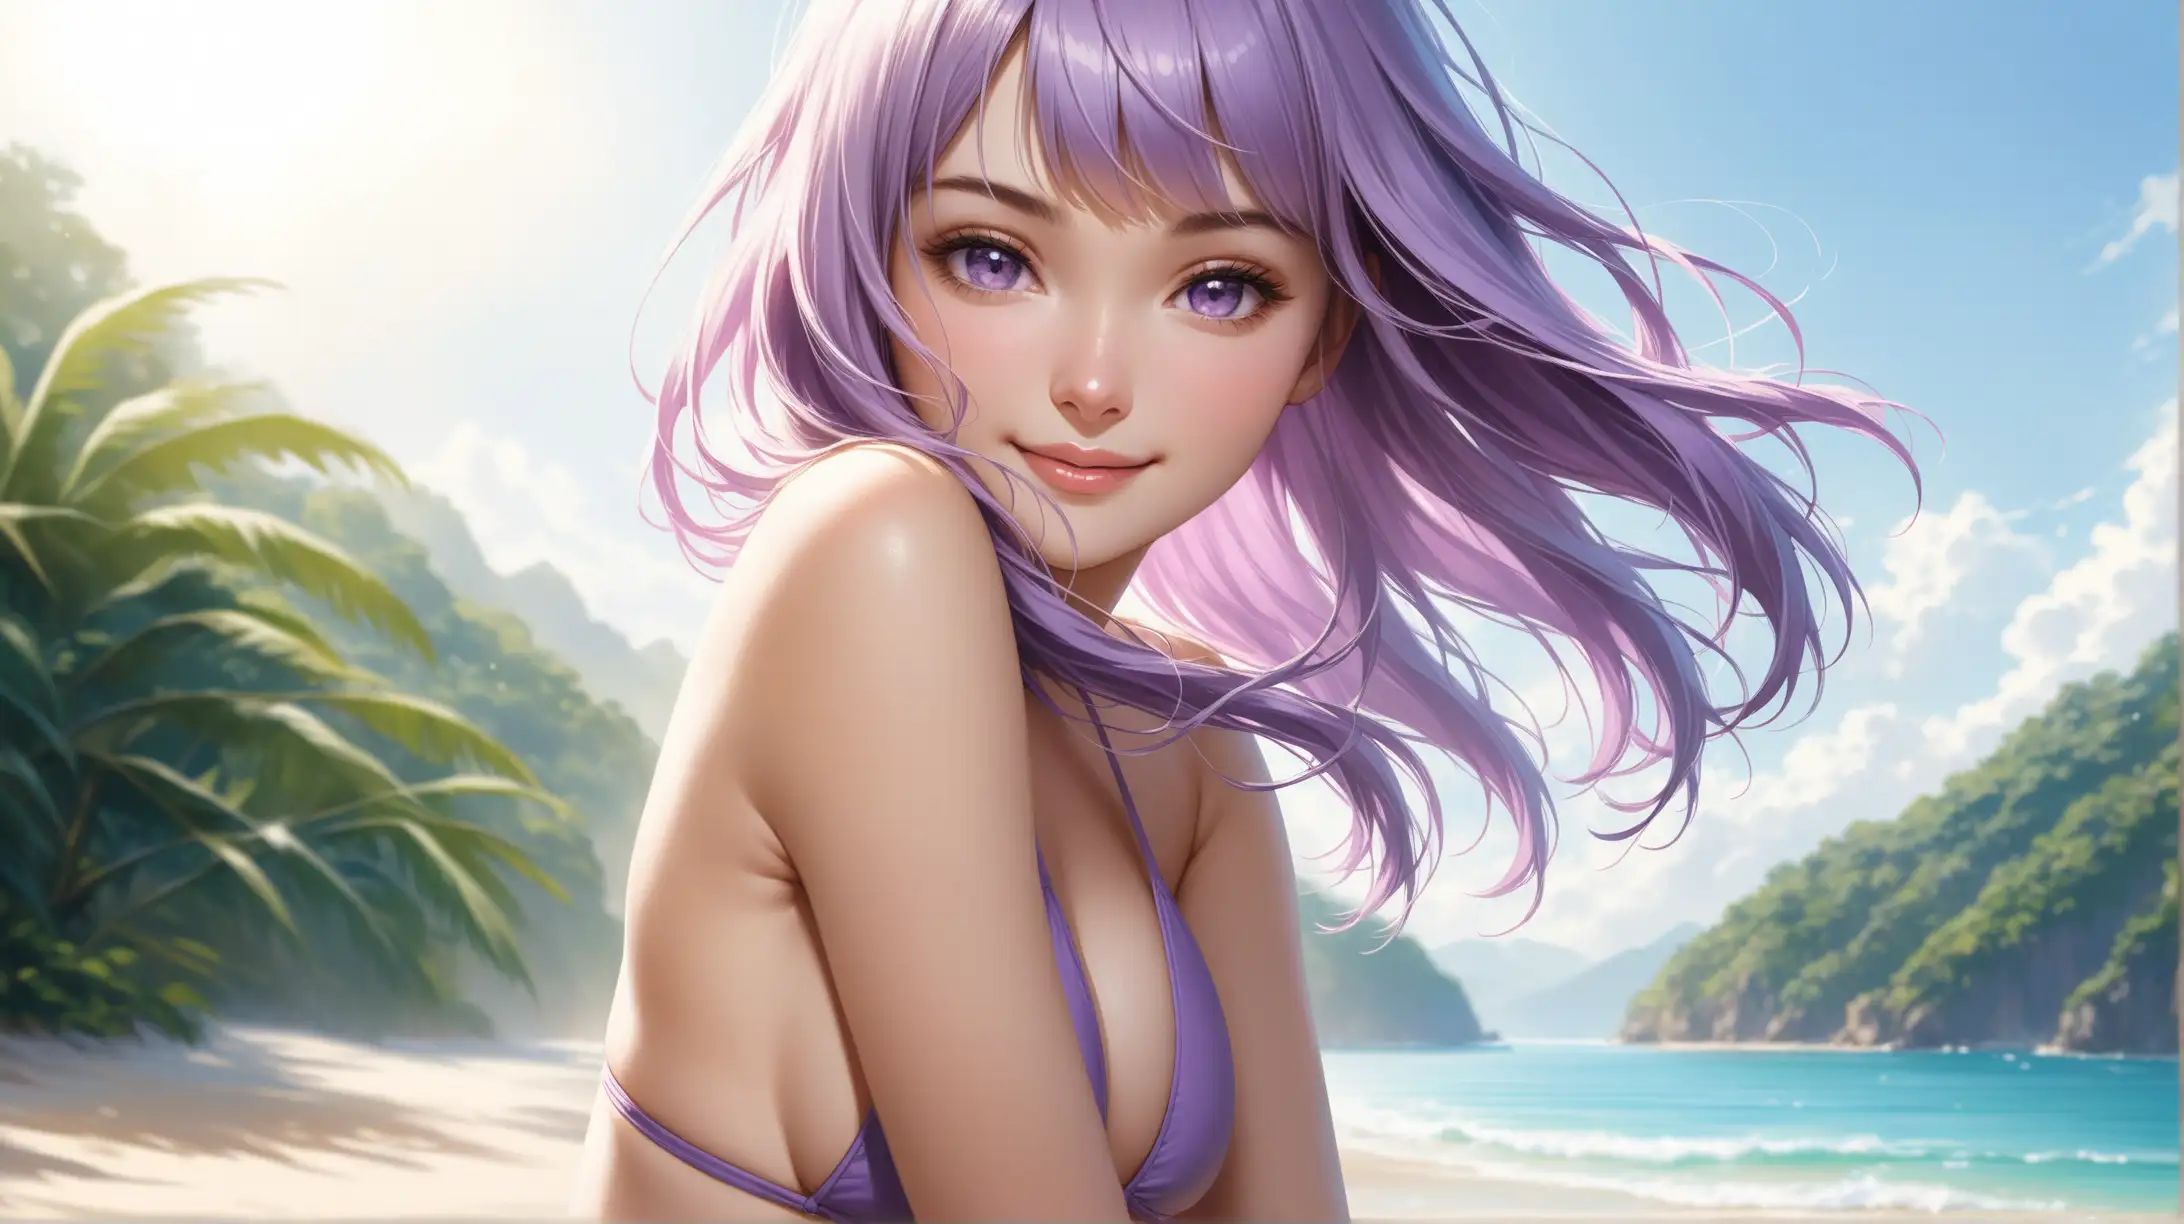 Seductive Woman with Light Purple Hair in Swimsuit Outdoors